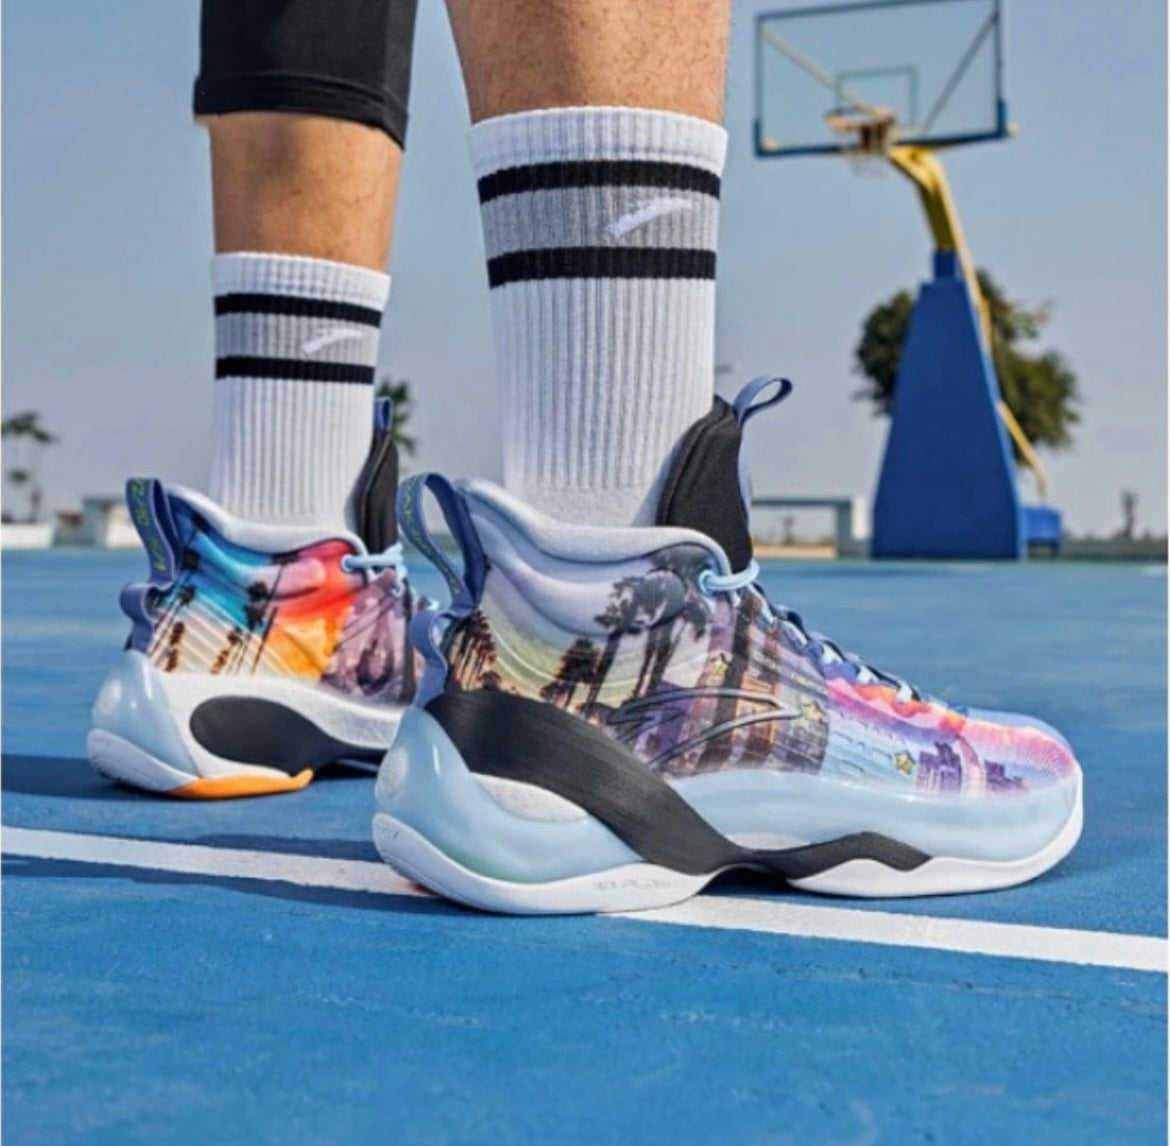 What Pros Wear: Klay Thompson's ANTA KT 7 Shoes - What Pros Wear